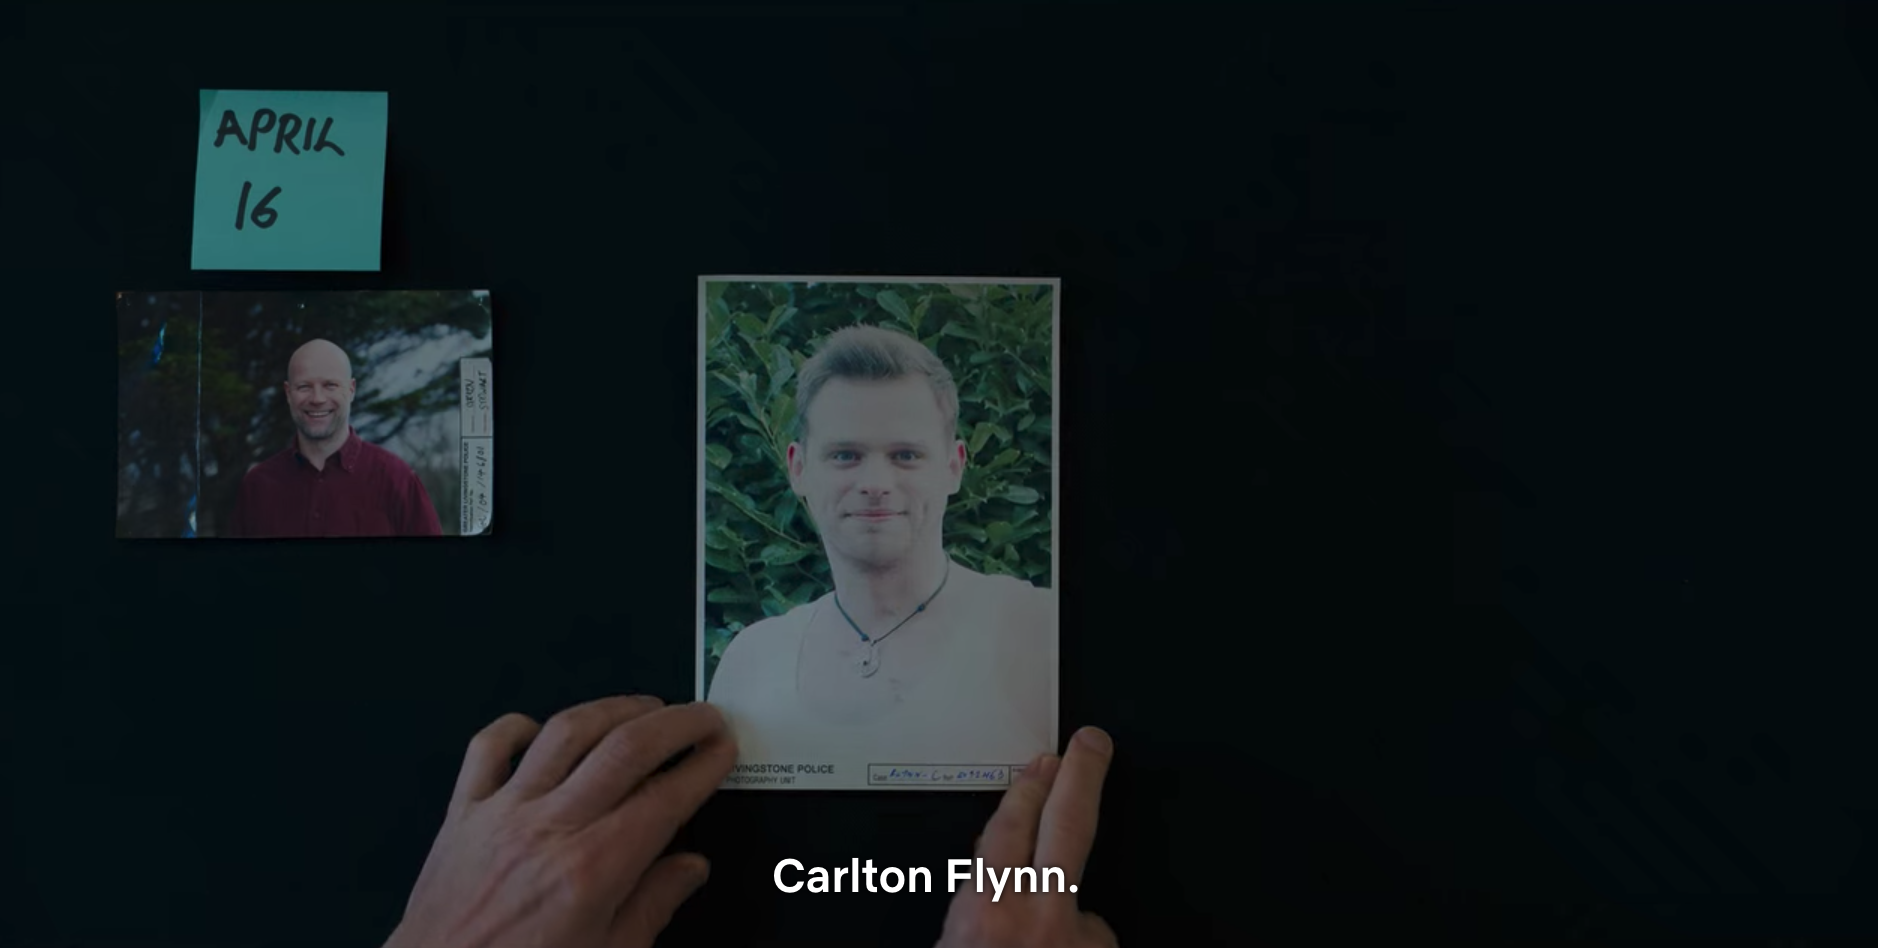 Someone looking at a picture of a man with the caption Carlton Flynn next to a photograph of another man with a sticky note that says April 16 above it